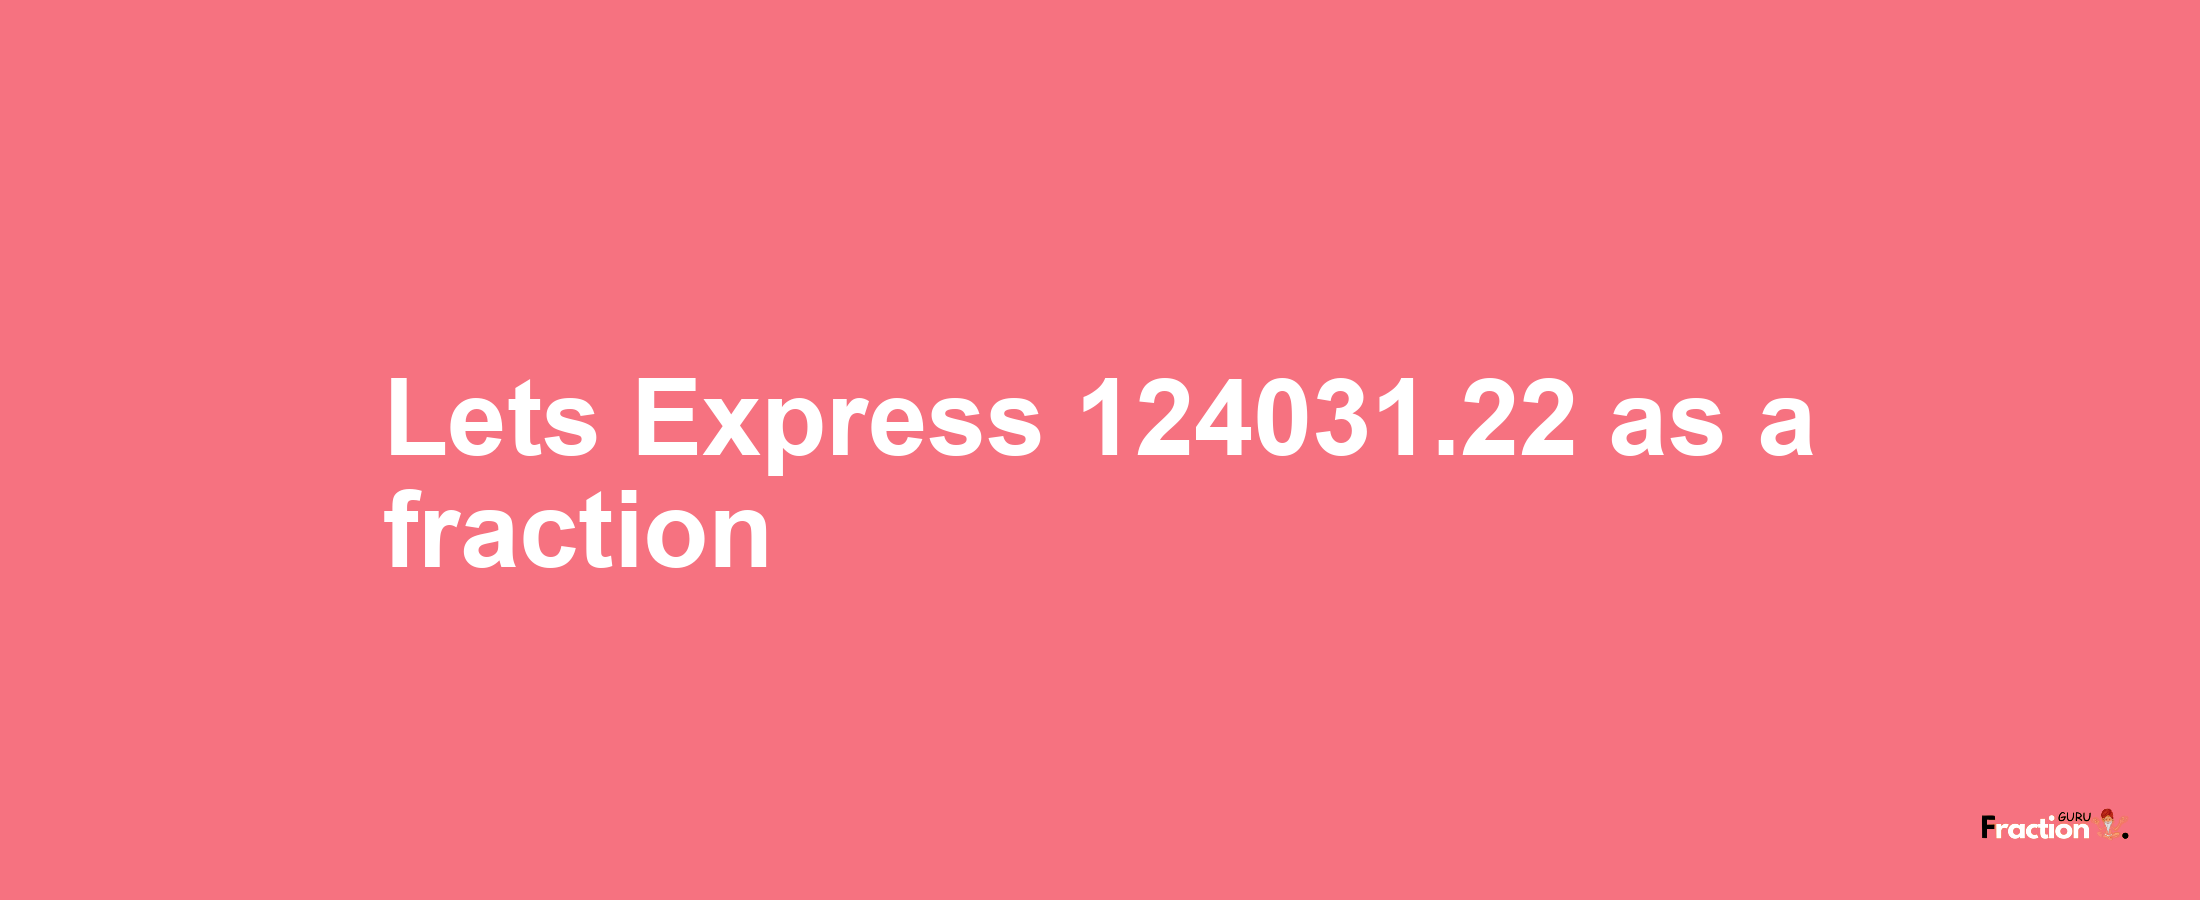 Lets Express 124031.22 as afraction